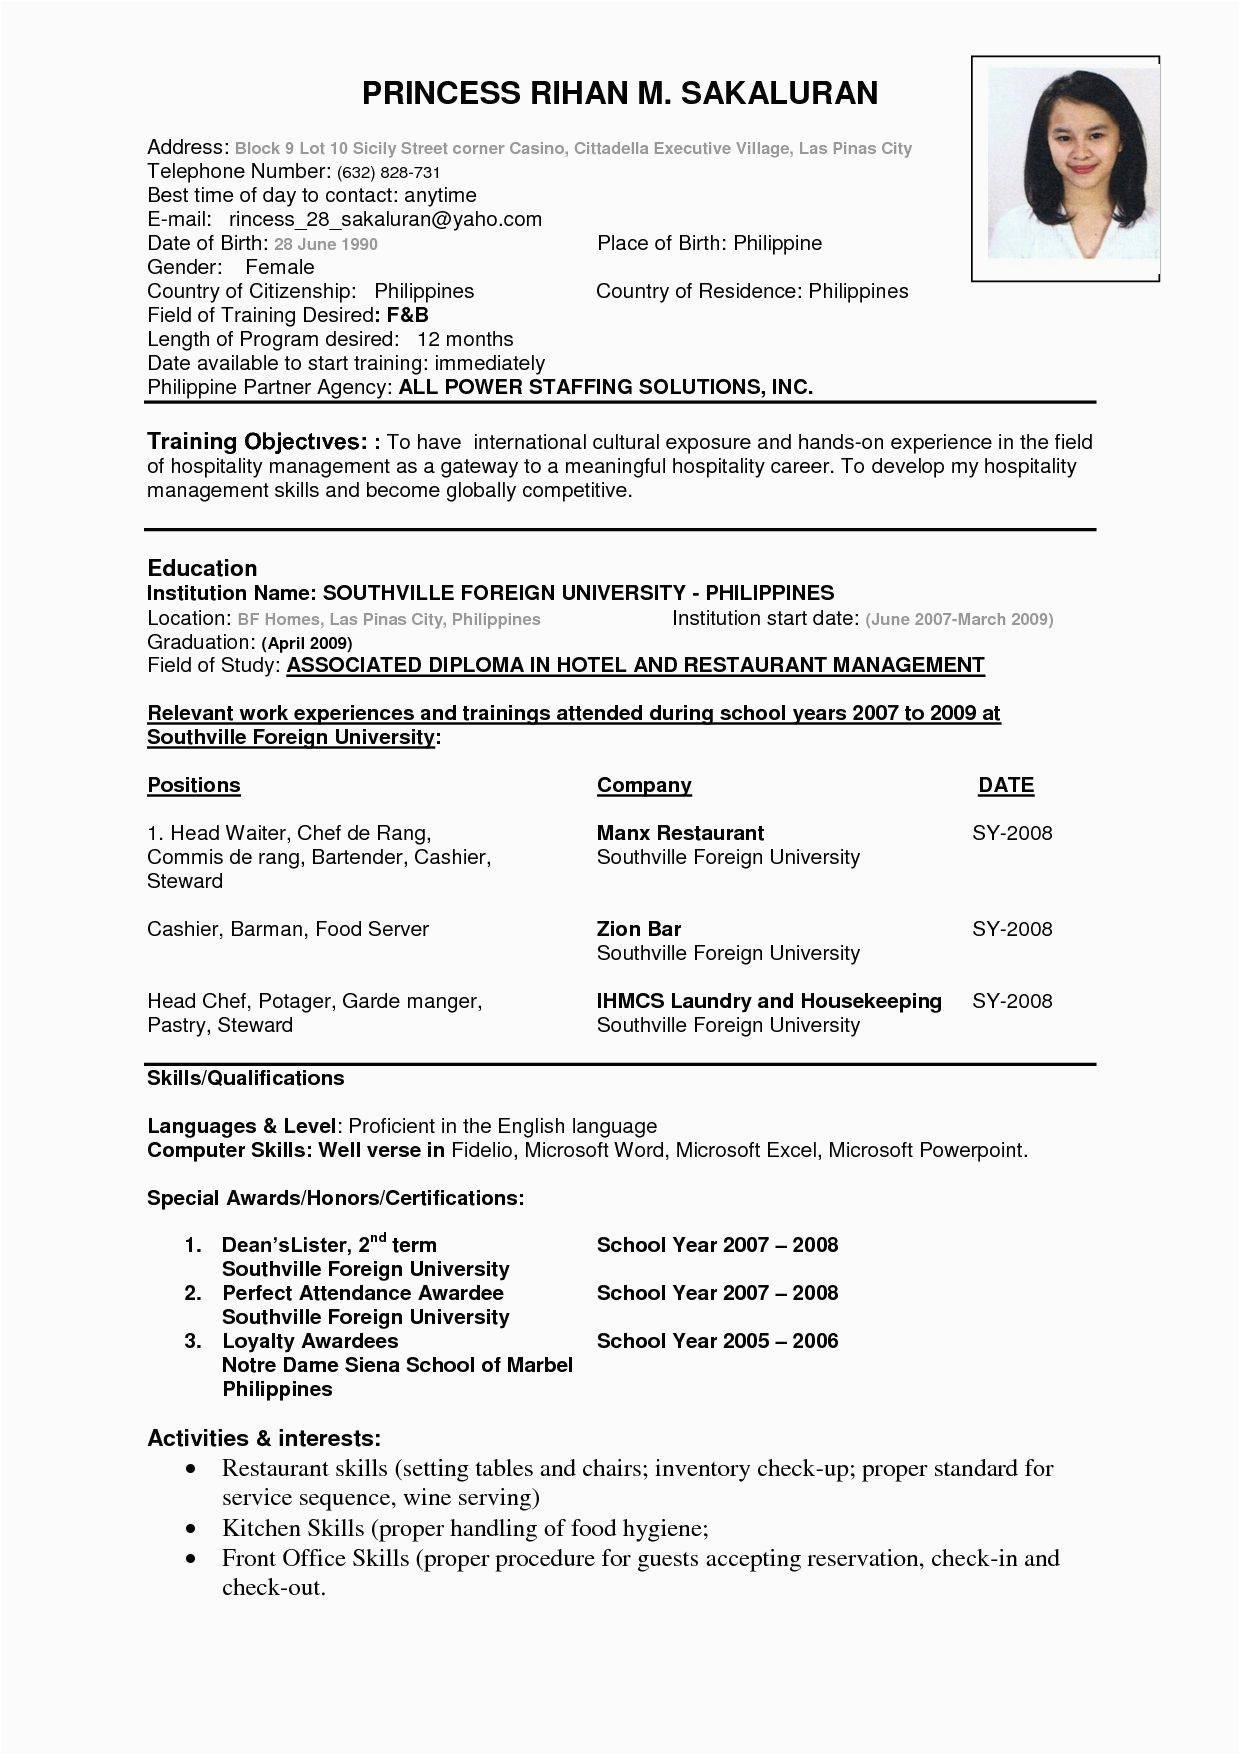 resume format in word for hotel